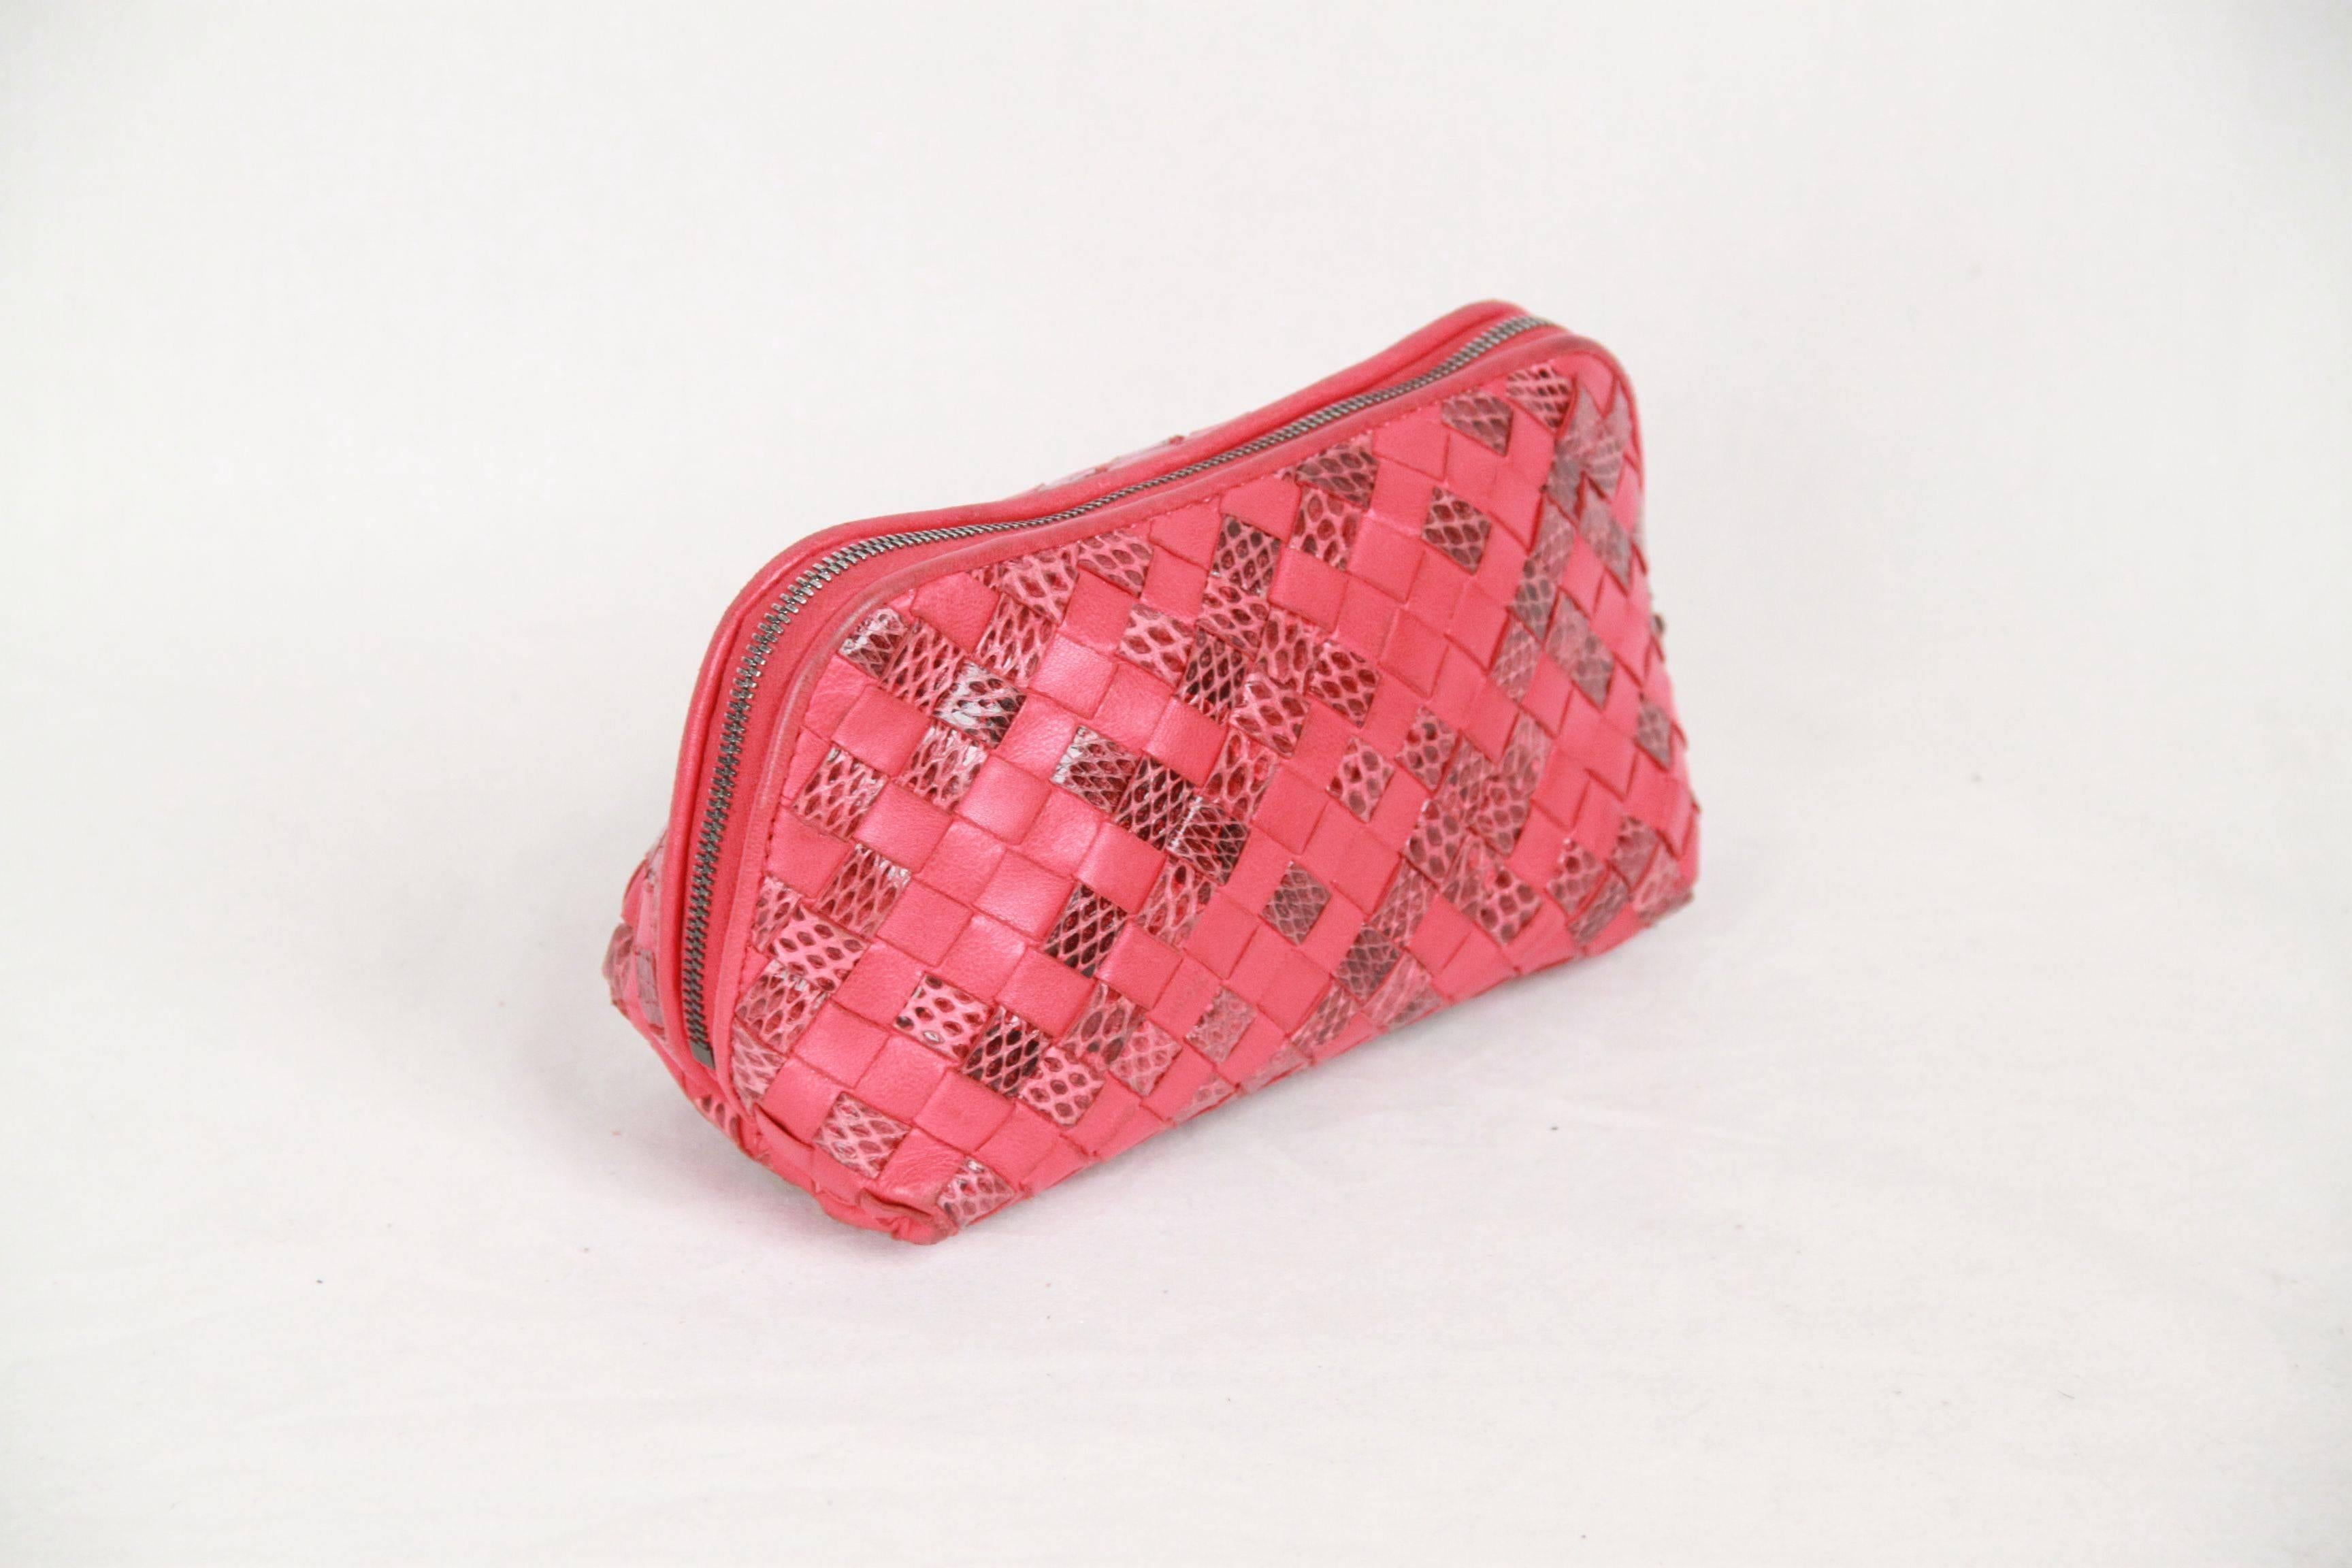 Bottega Veneta's red cosmetic case is handcrafted of soft red leather and snakeskin leather woven in the house's signature Intrecciato pattern. A hallmark of the Italian brand, this pattern was created in the 1960s to increase the strength and